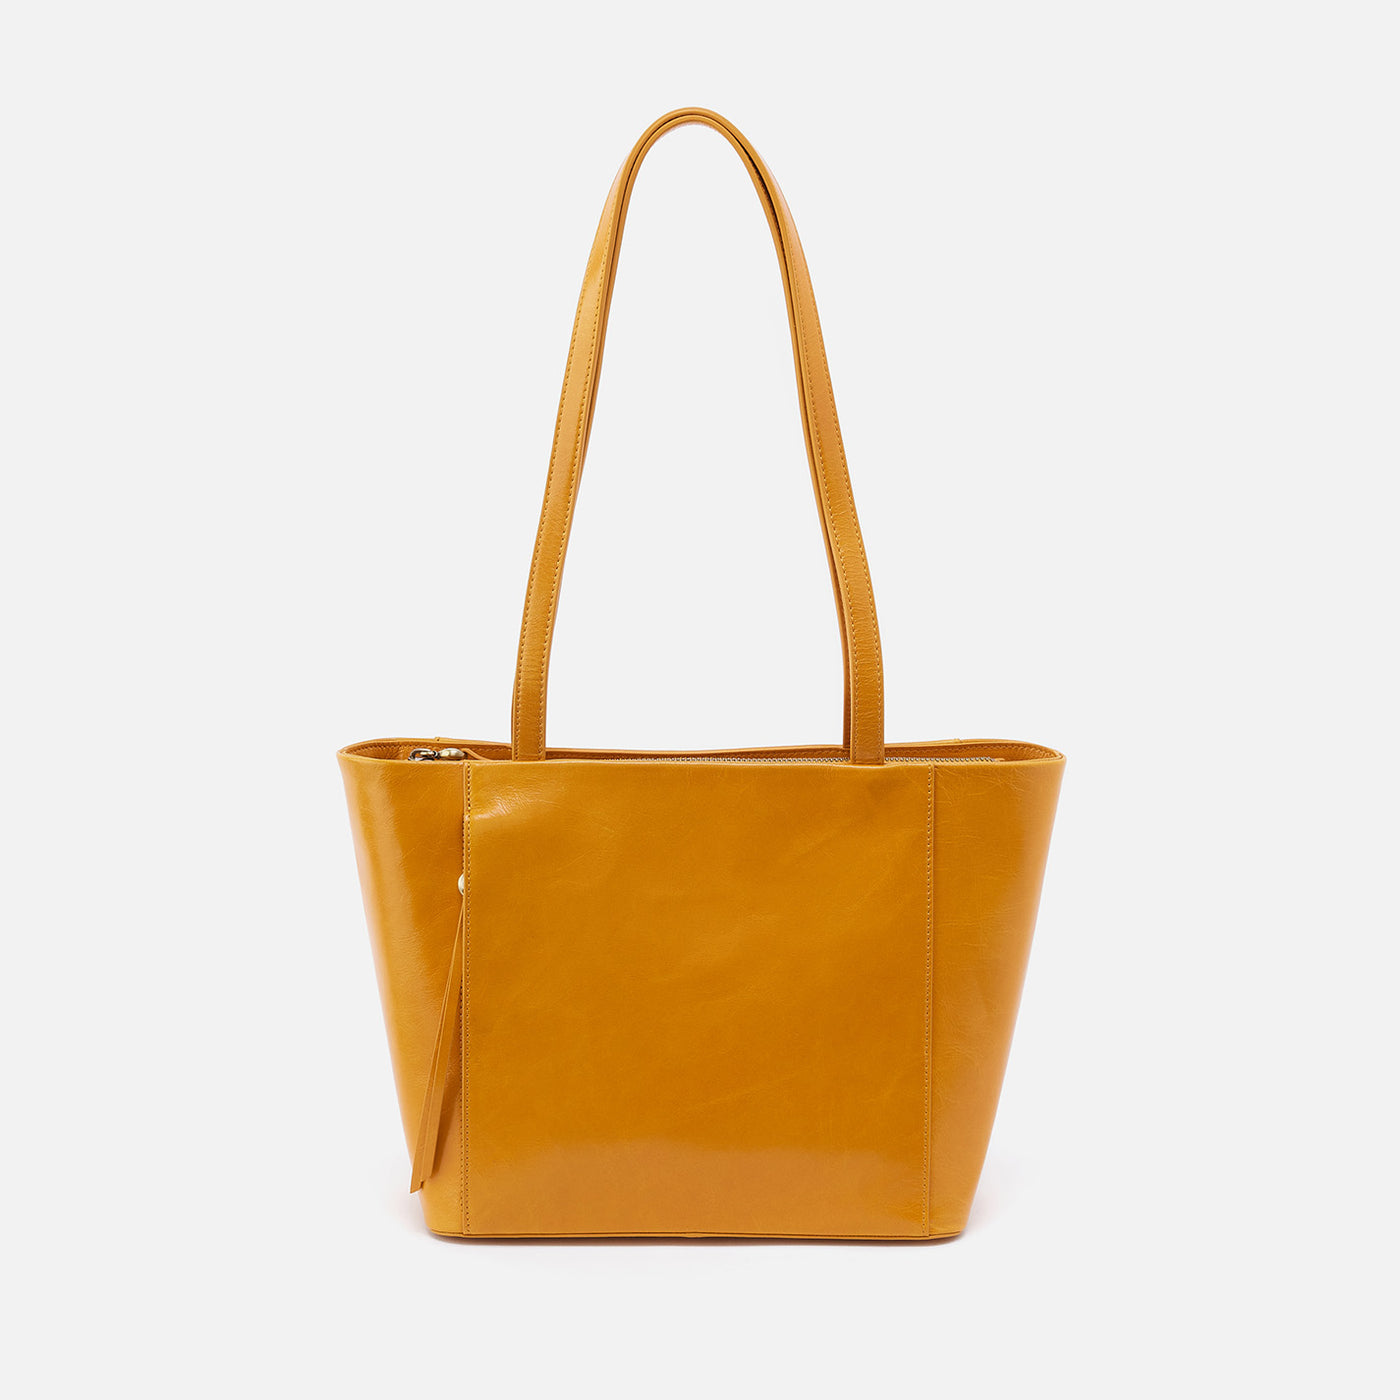 Haven Tote in Polished Leather - Warm Amber